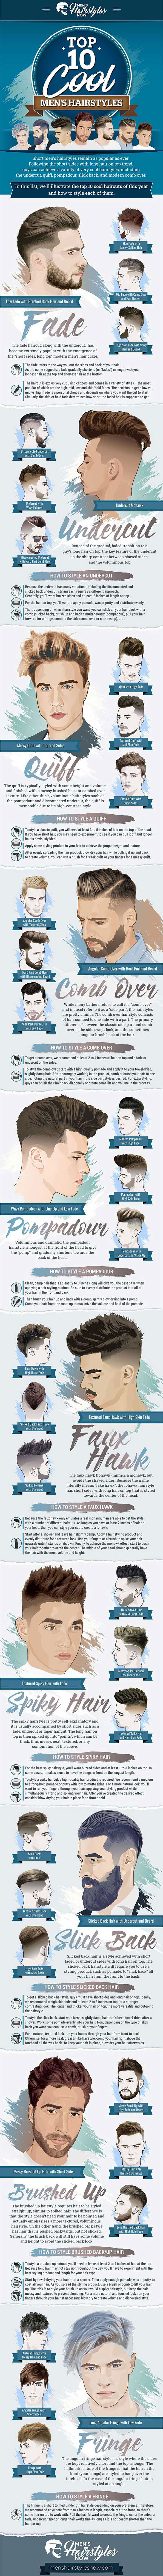 hairstyles for men 2017